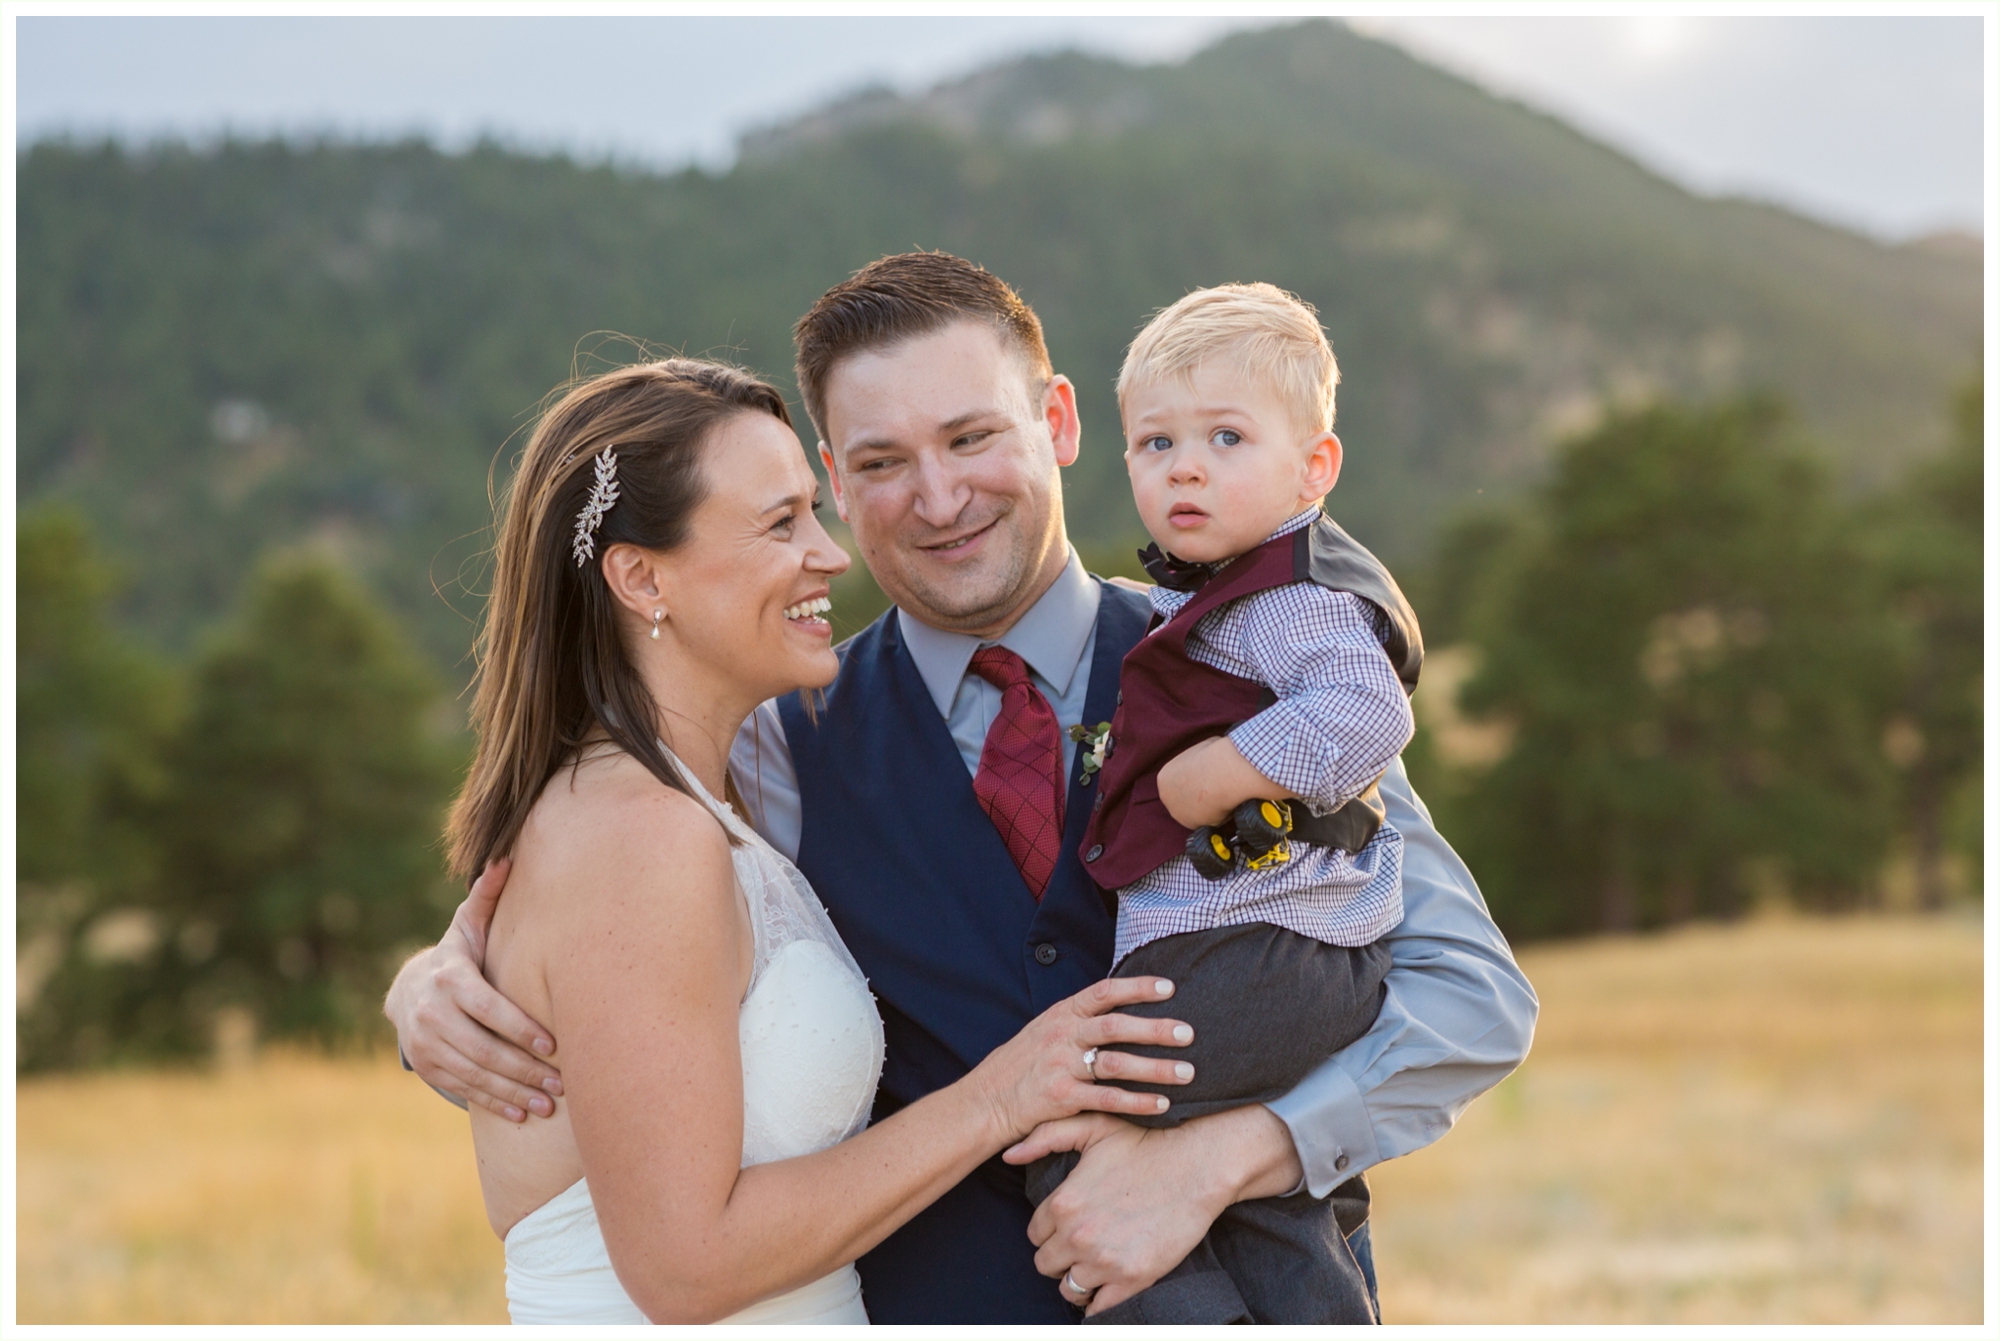 sweet family portraits after couples elopement at betasso preserve in boulder colorado